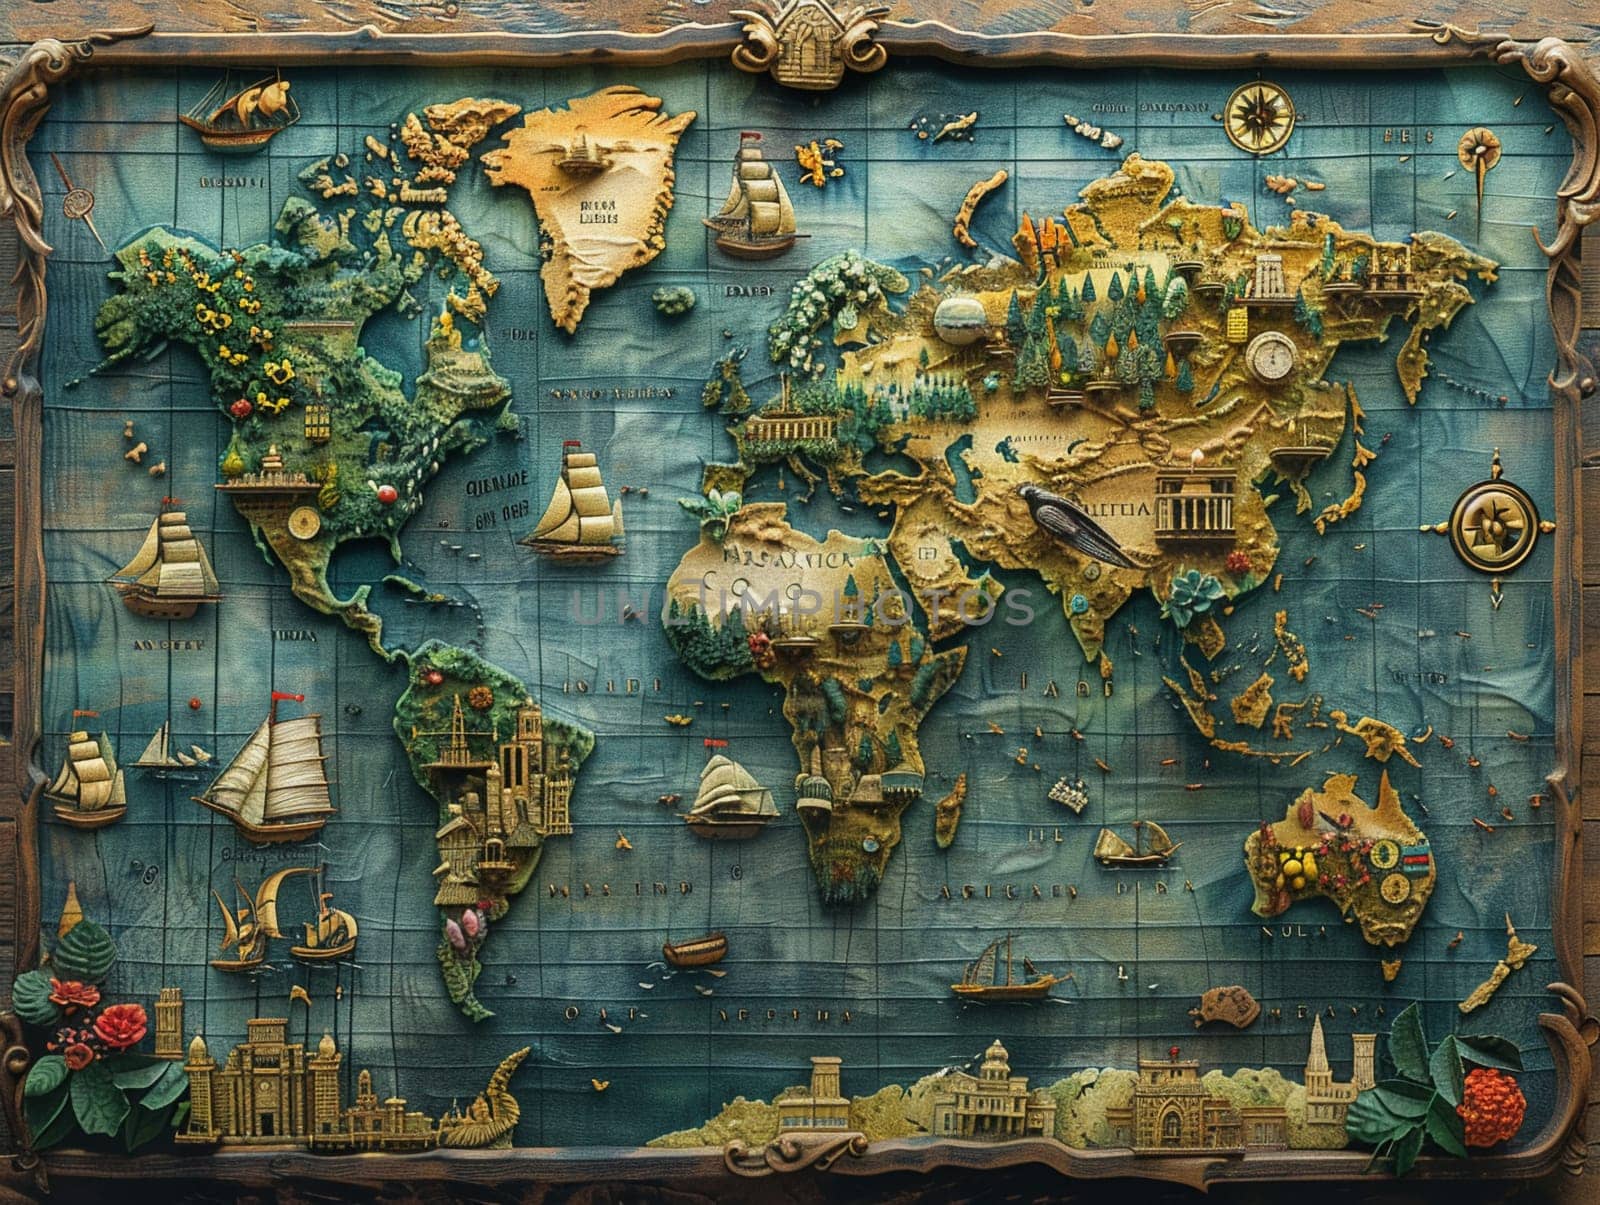 World map in a unique digital art style by Benzoix